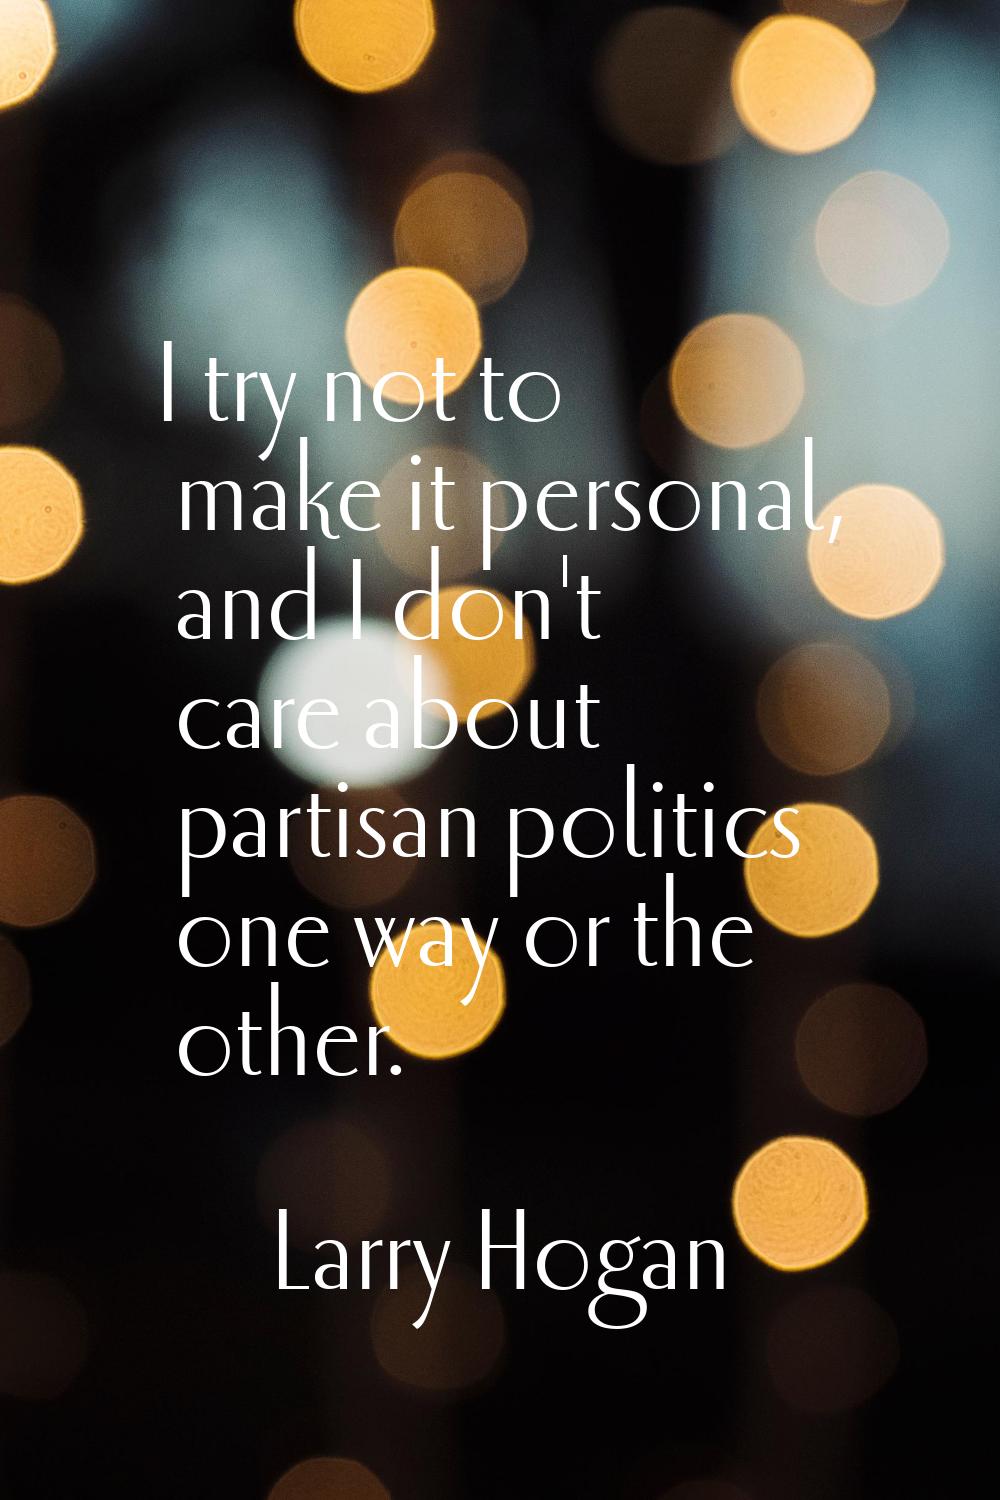 I try not to make it personal, and I don't care about partisan politics one way or the other.